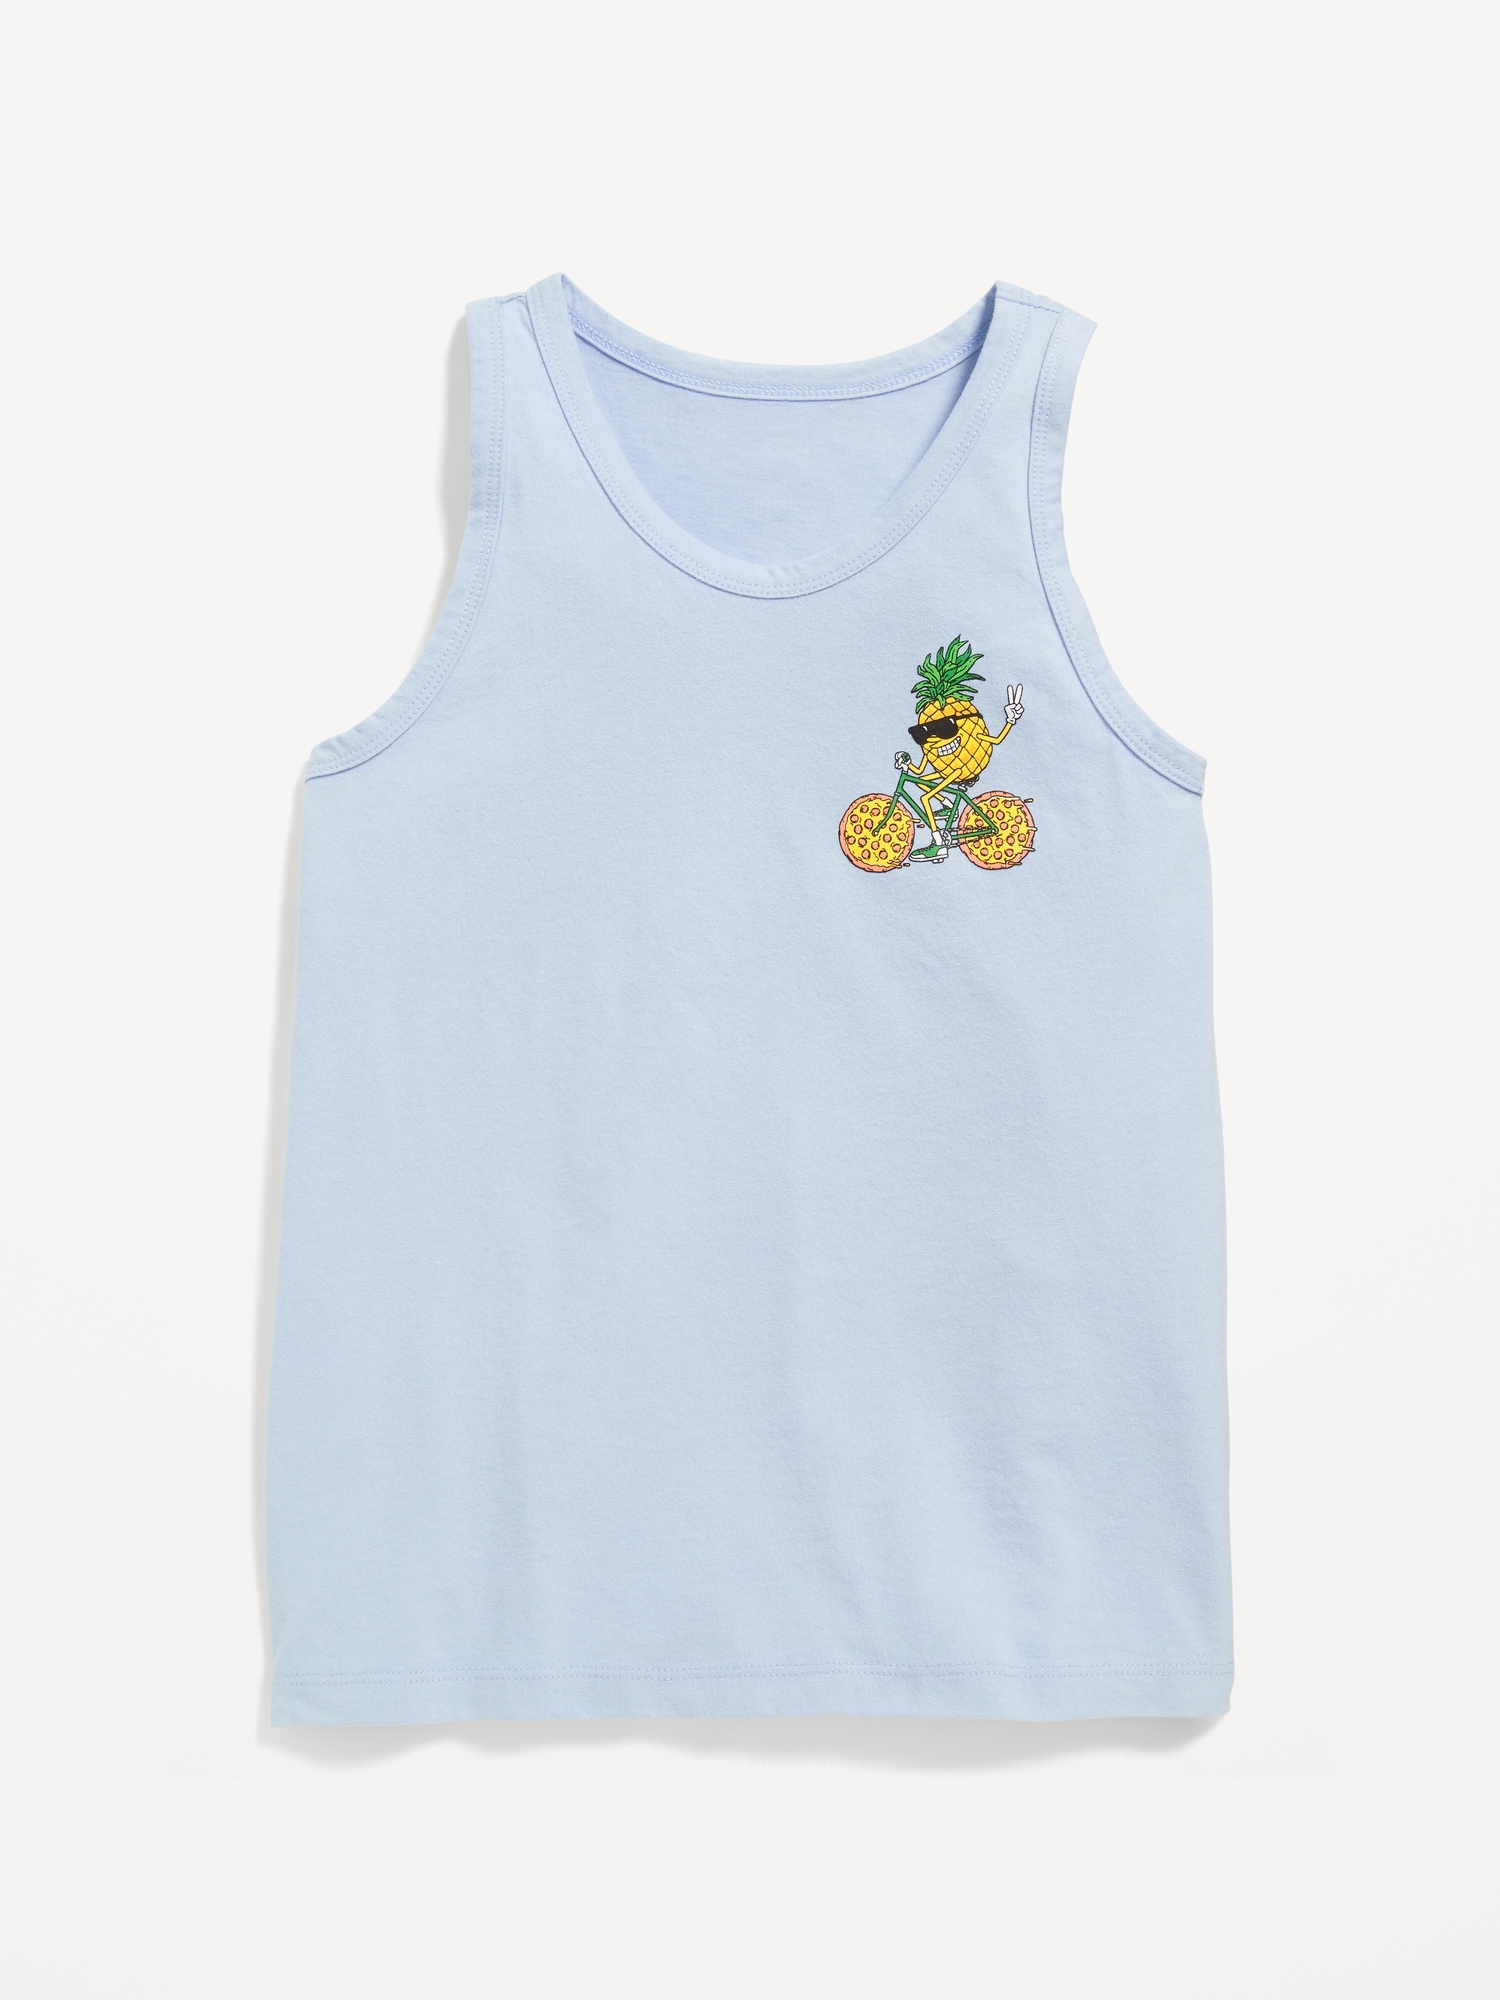 Old Navy Softest Graphic Tank Top for Boys blue. 1